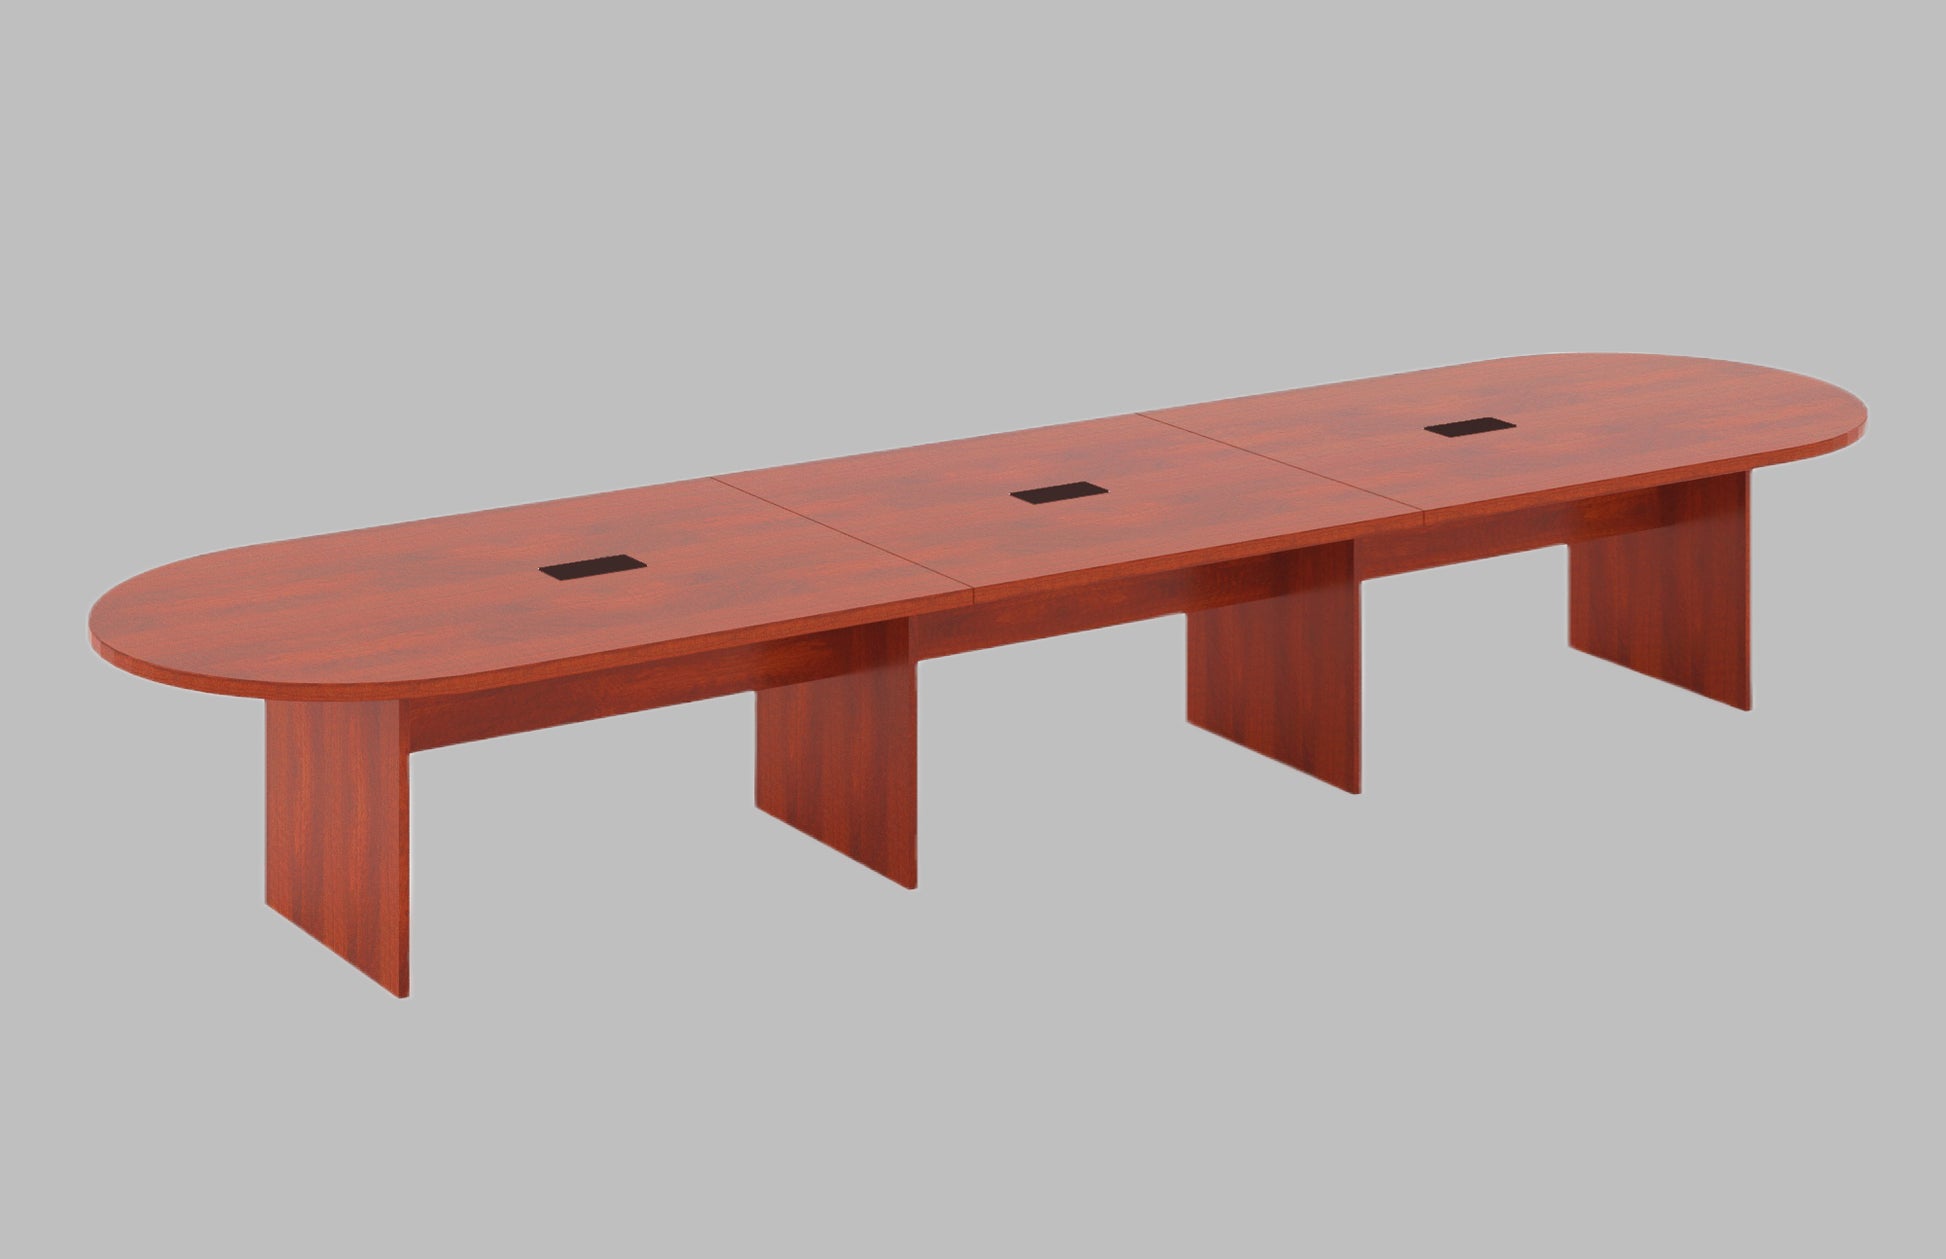 16FT Cherry racetrack shaped table